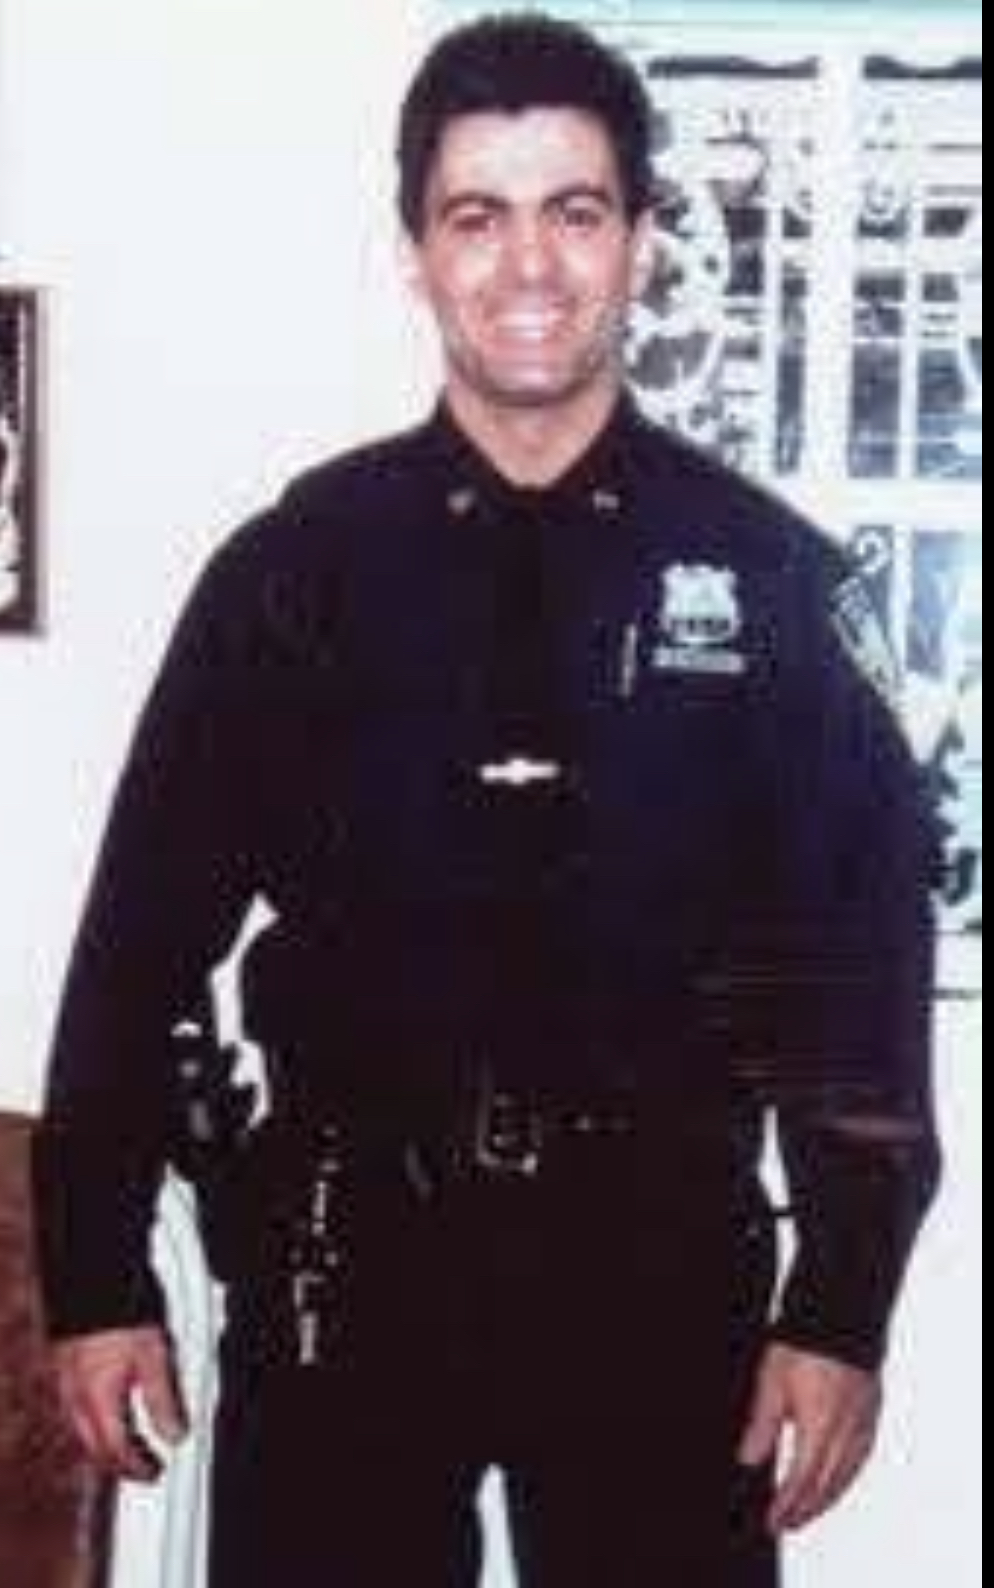 Police Officer Dominick A. Pezzulo | Port Authority of New York and New Jersey Police Department, New York